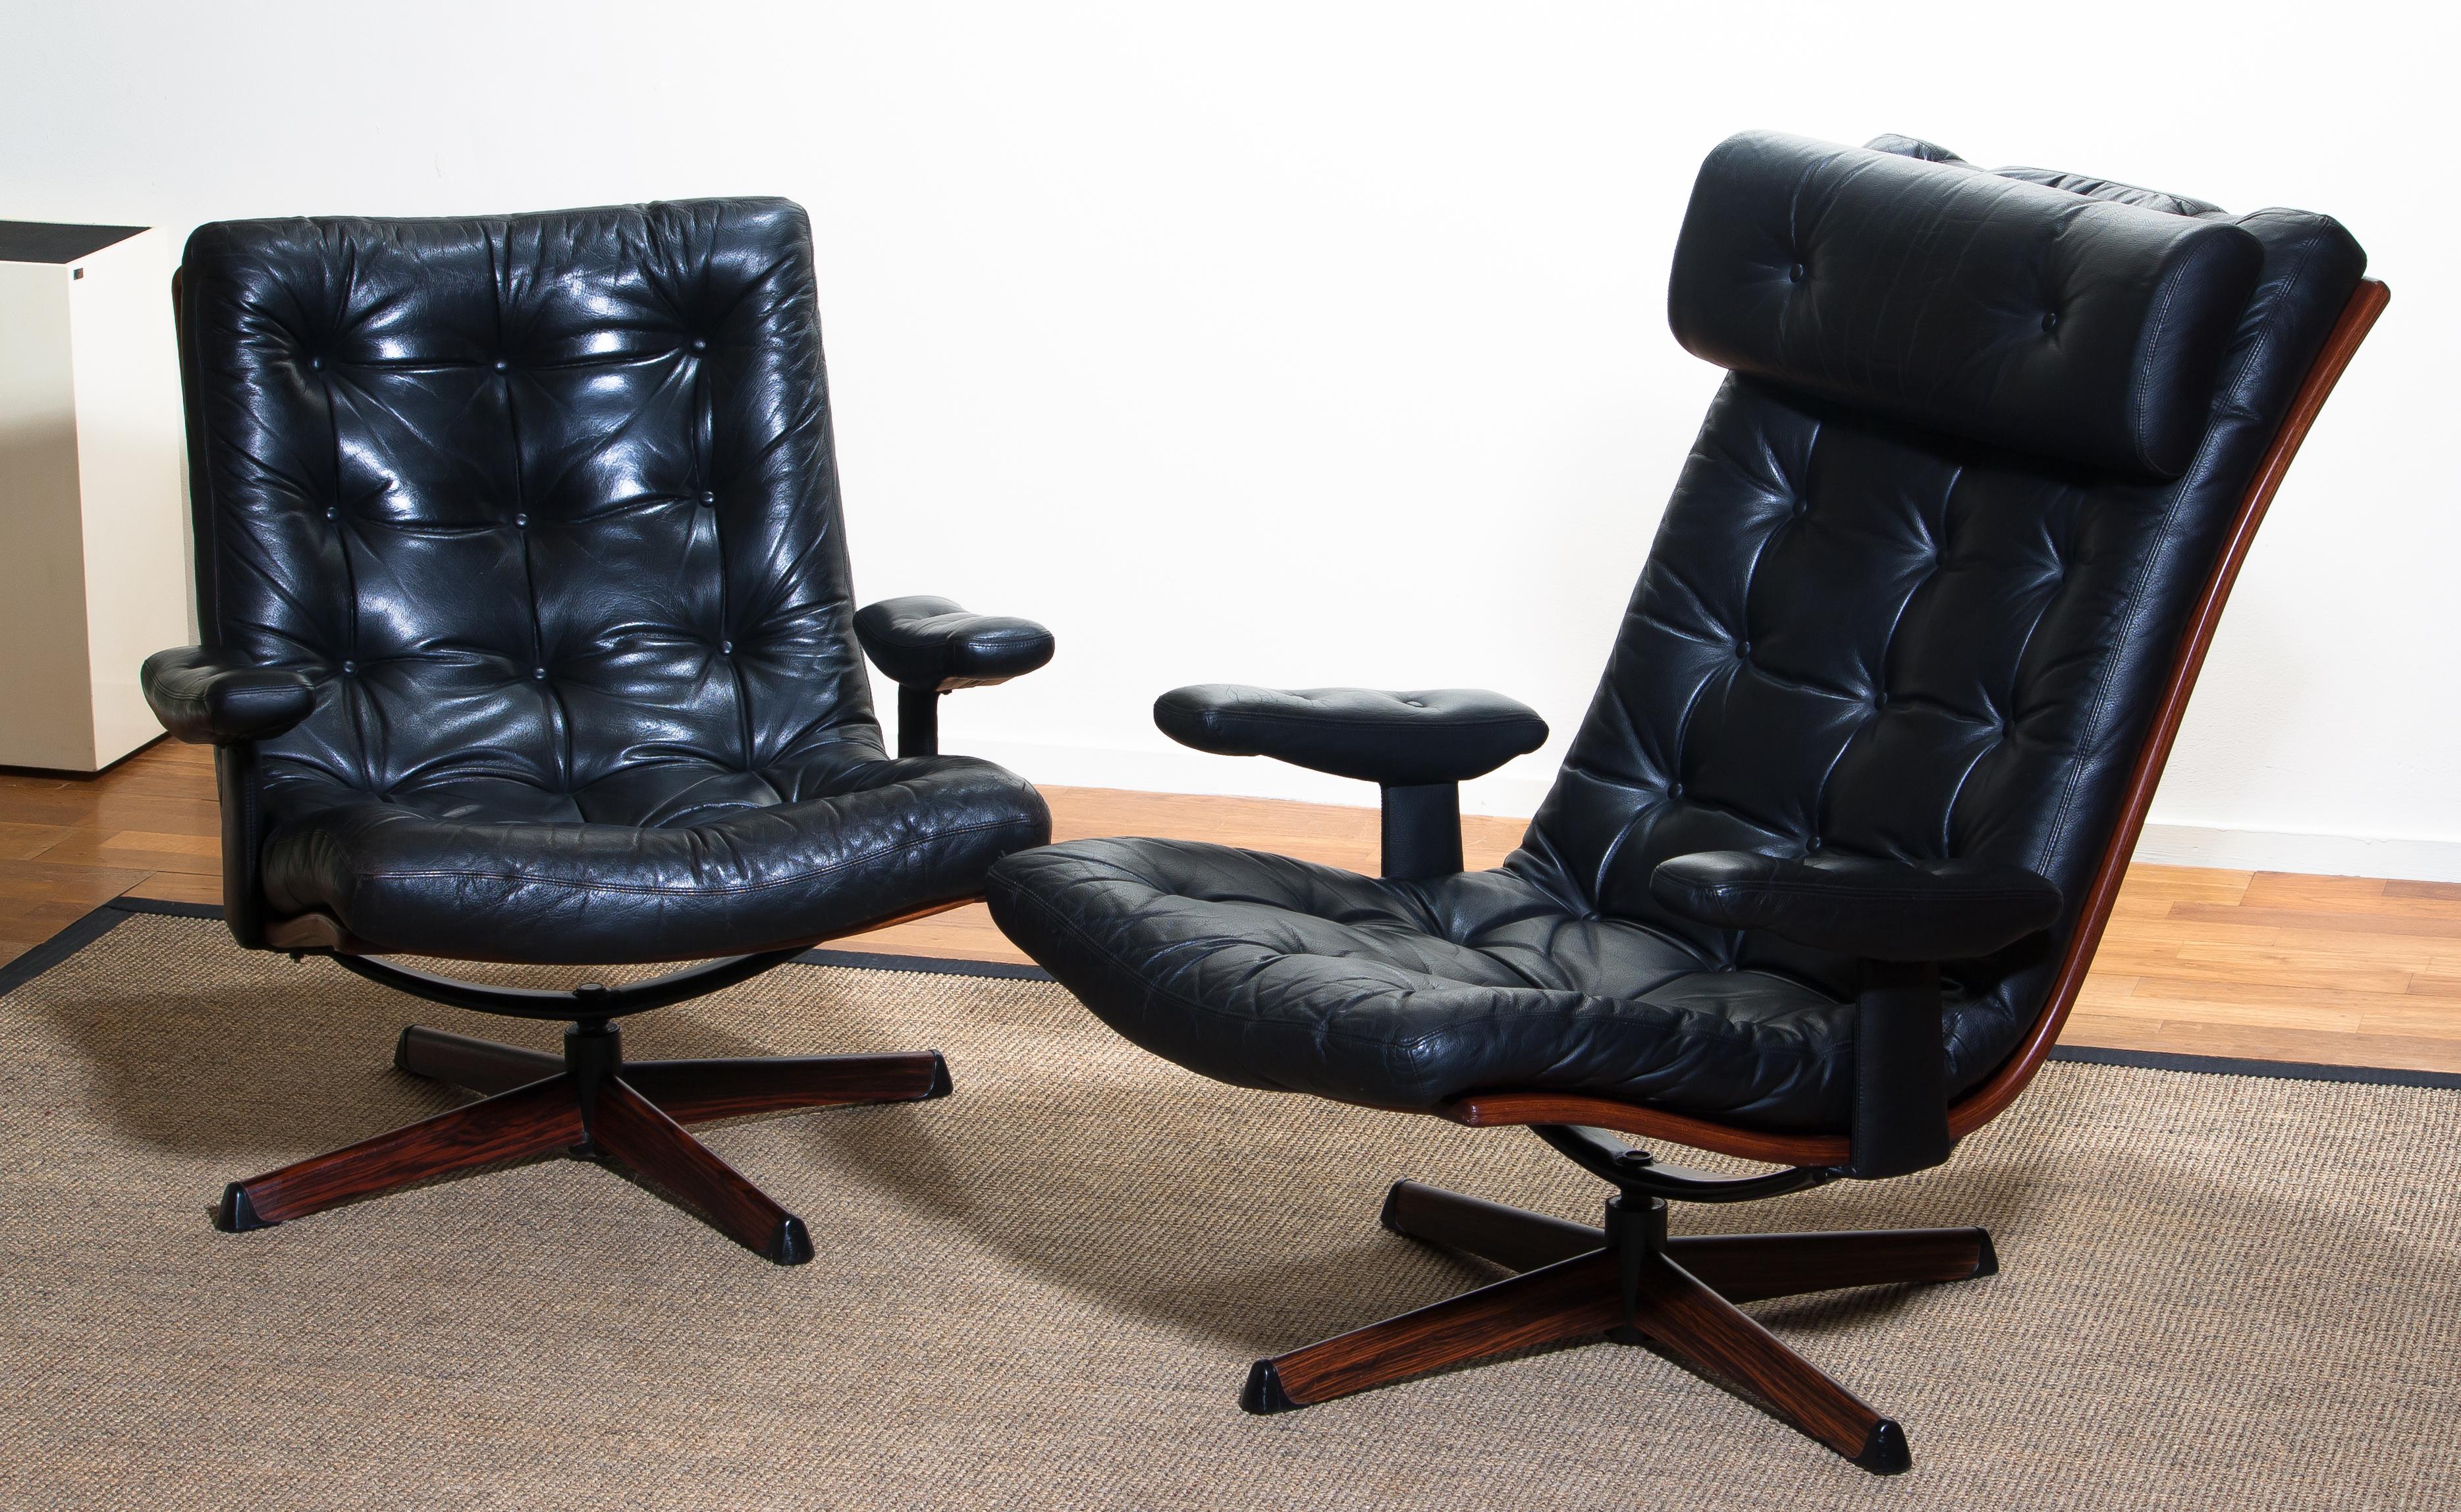 Mid-Century Modern 1960s Matching Pair of Black Leather Swivel Chairs by Gote Design Nassjo Sweden